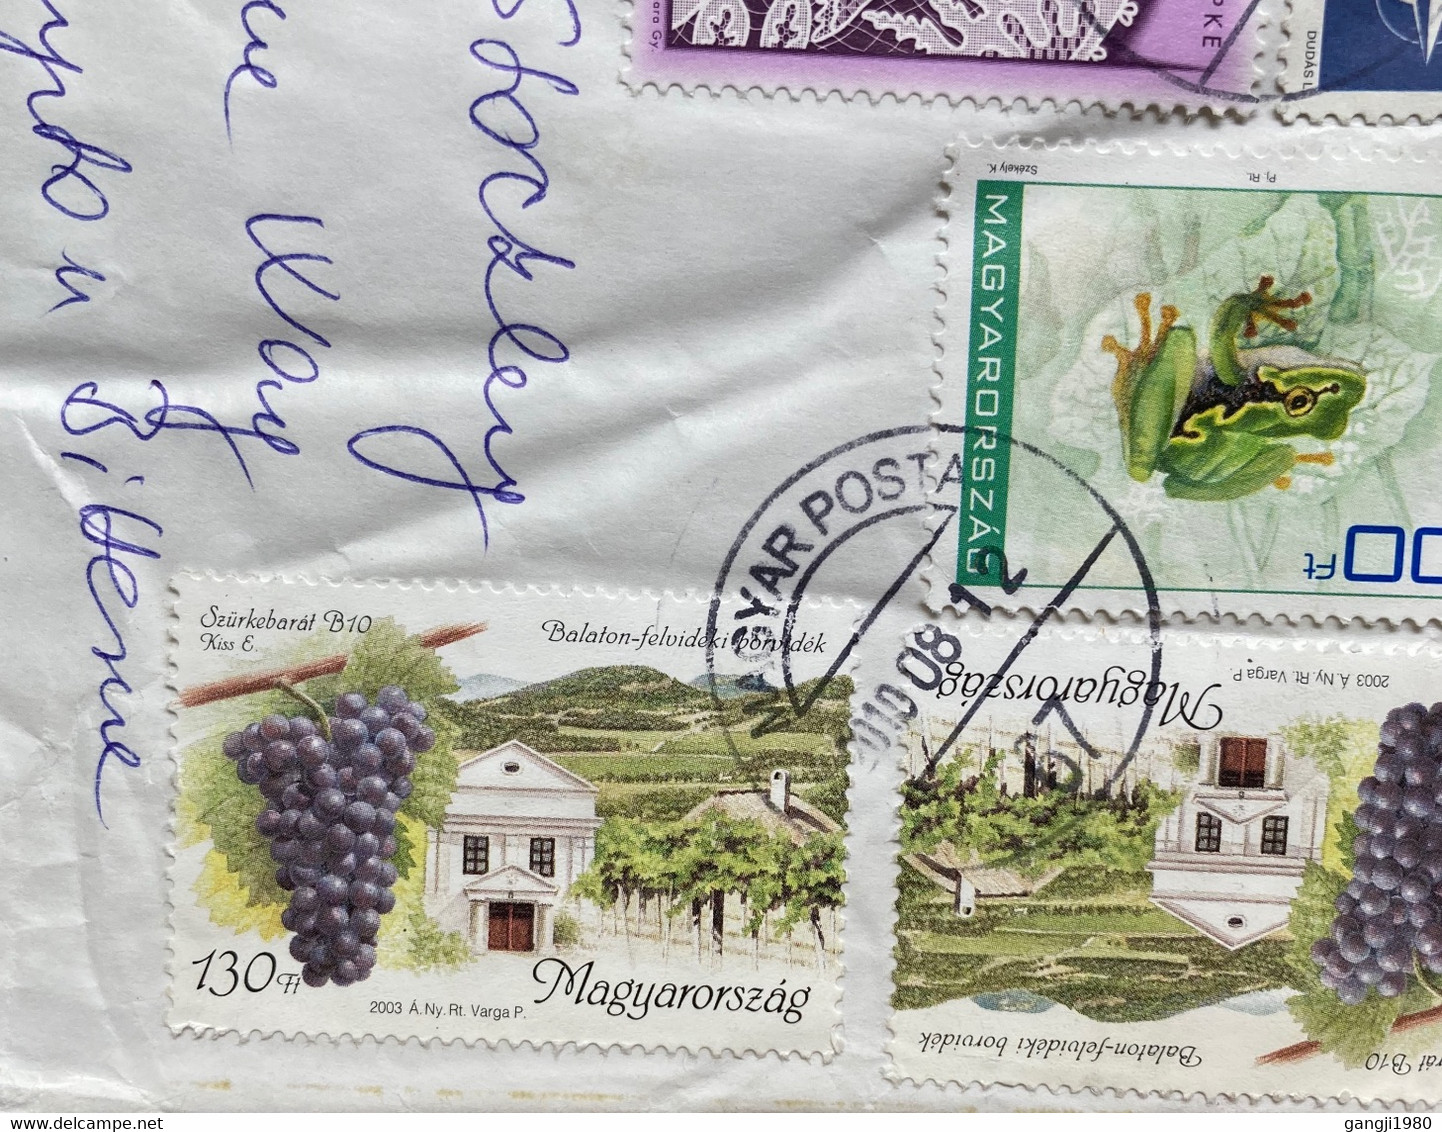 HUNGARY 2001-2002, COUPLE DANCE,FROG ,FISH ,RAILWAY,GRAPE ,EUROPA, MAP, NATURE,BUILDING,11 REGISTERED STAMPS USED !!! CO - Covers & Documents